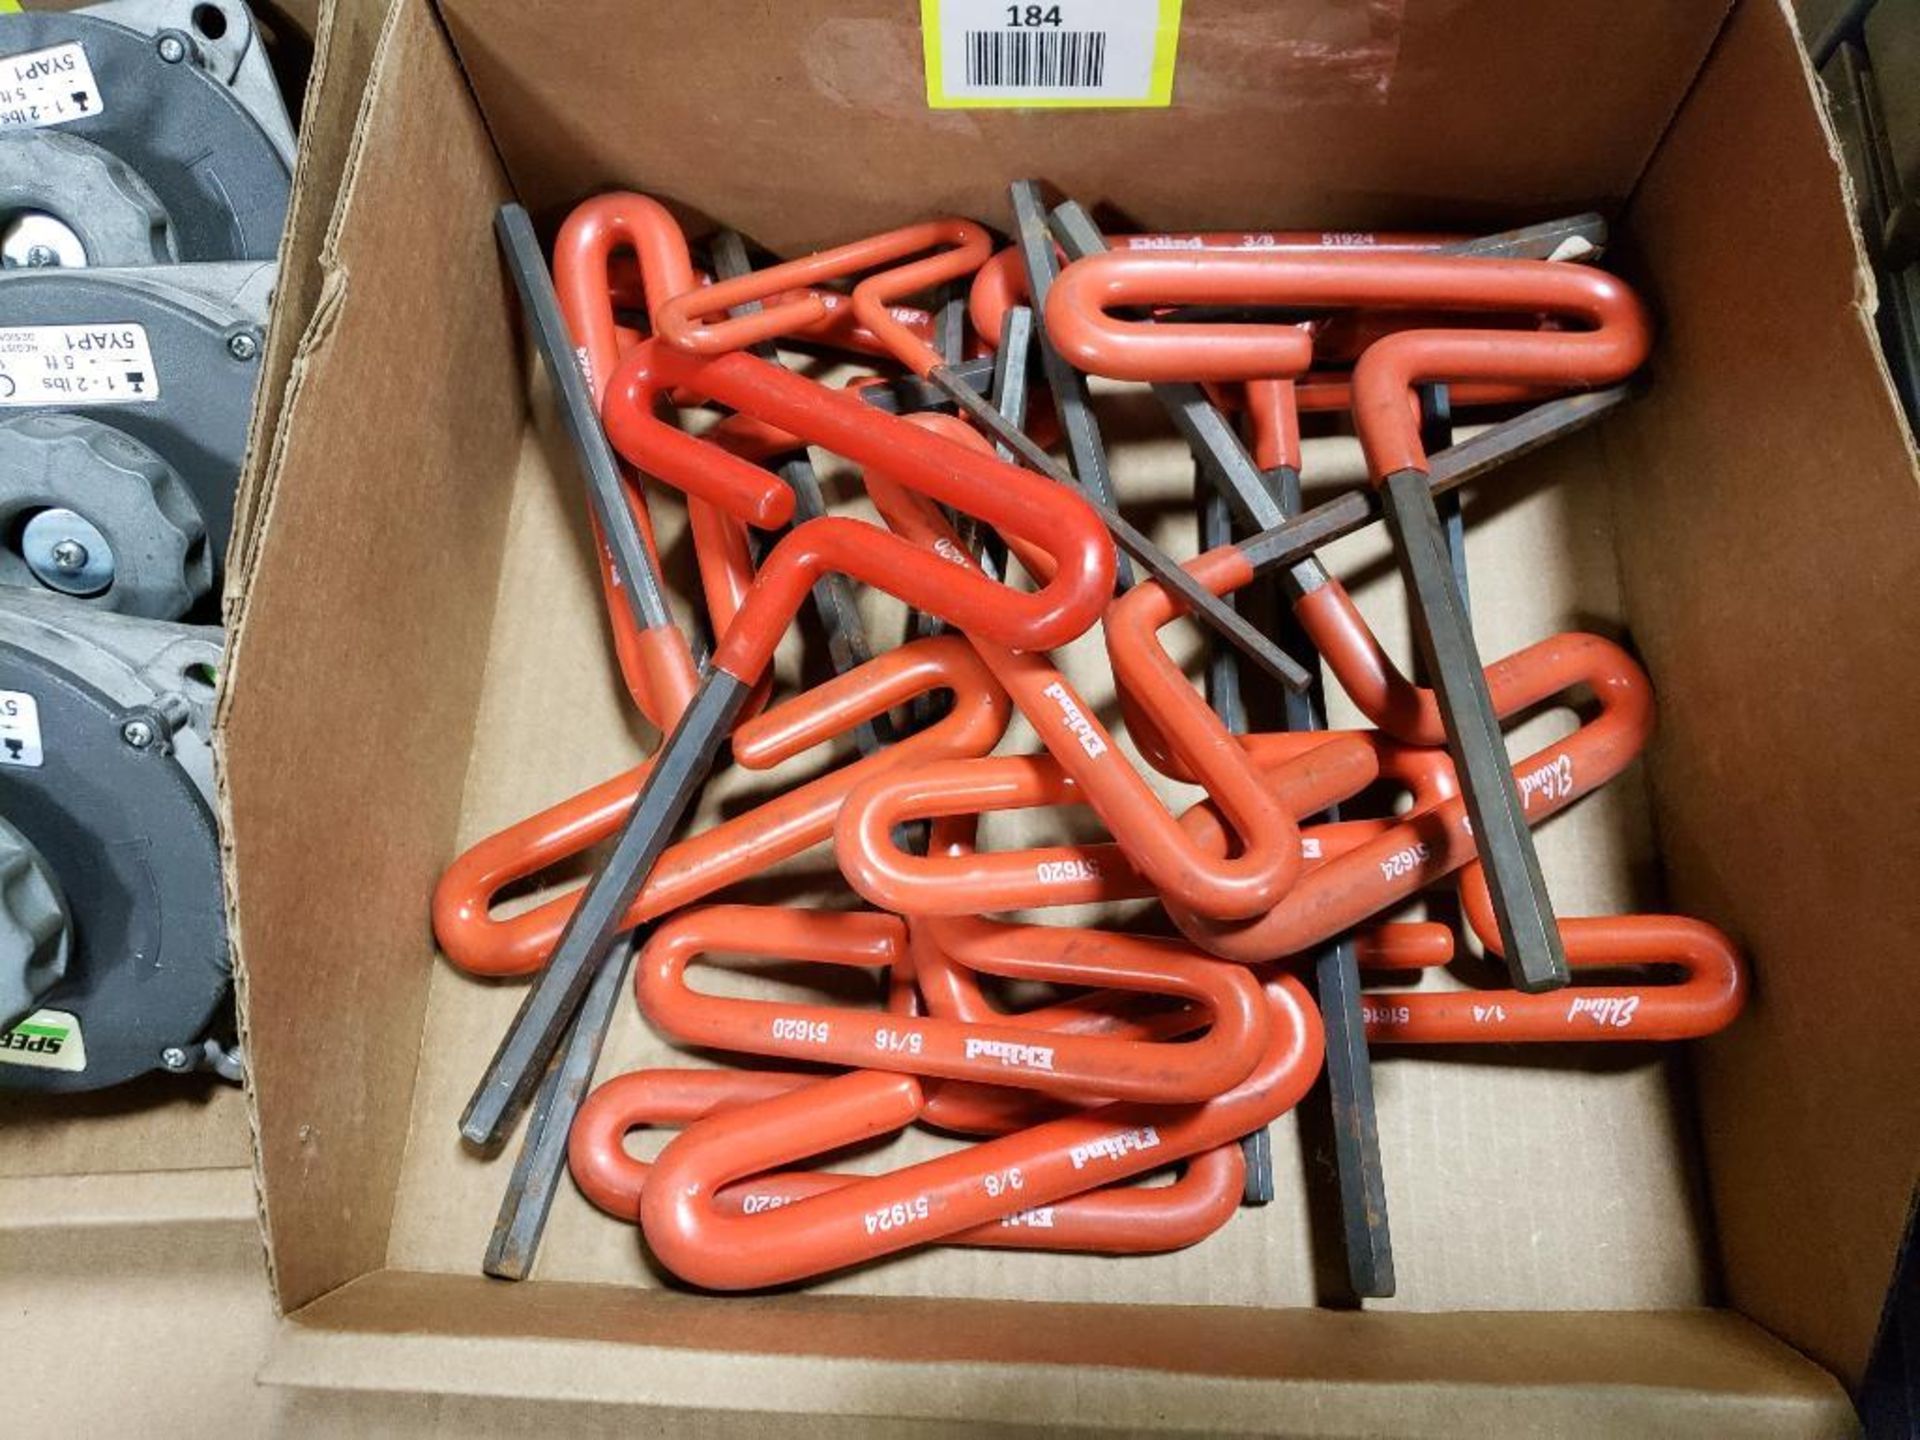 Large Qty of Eklind allen wrench 51924.